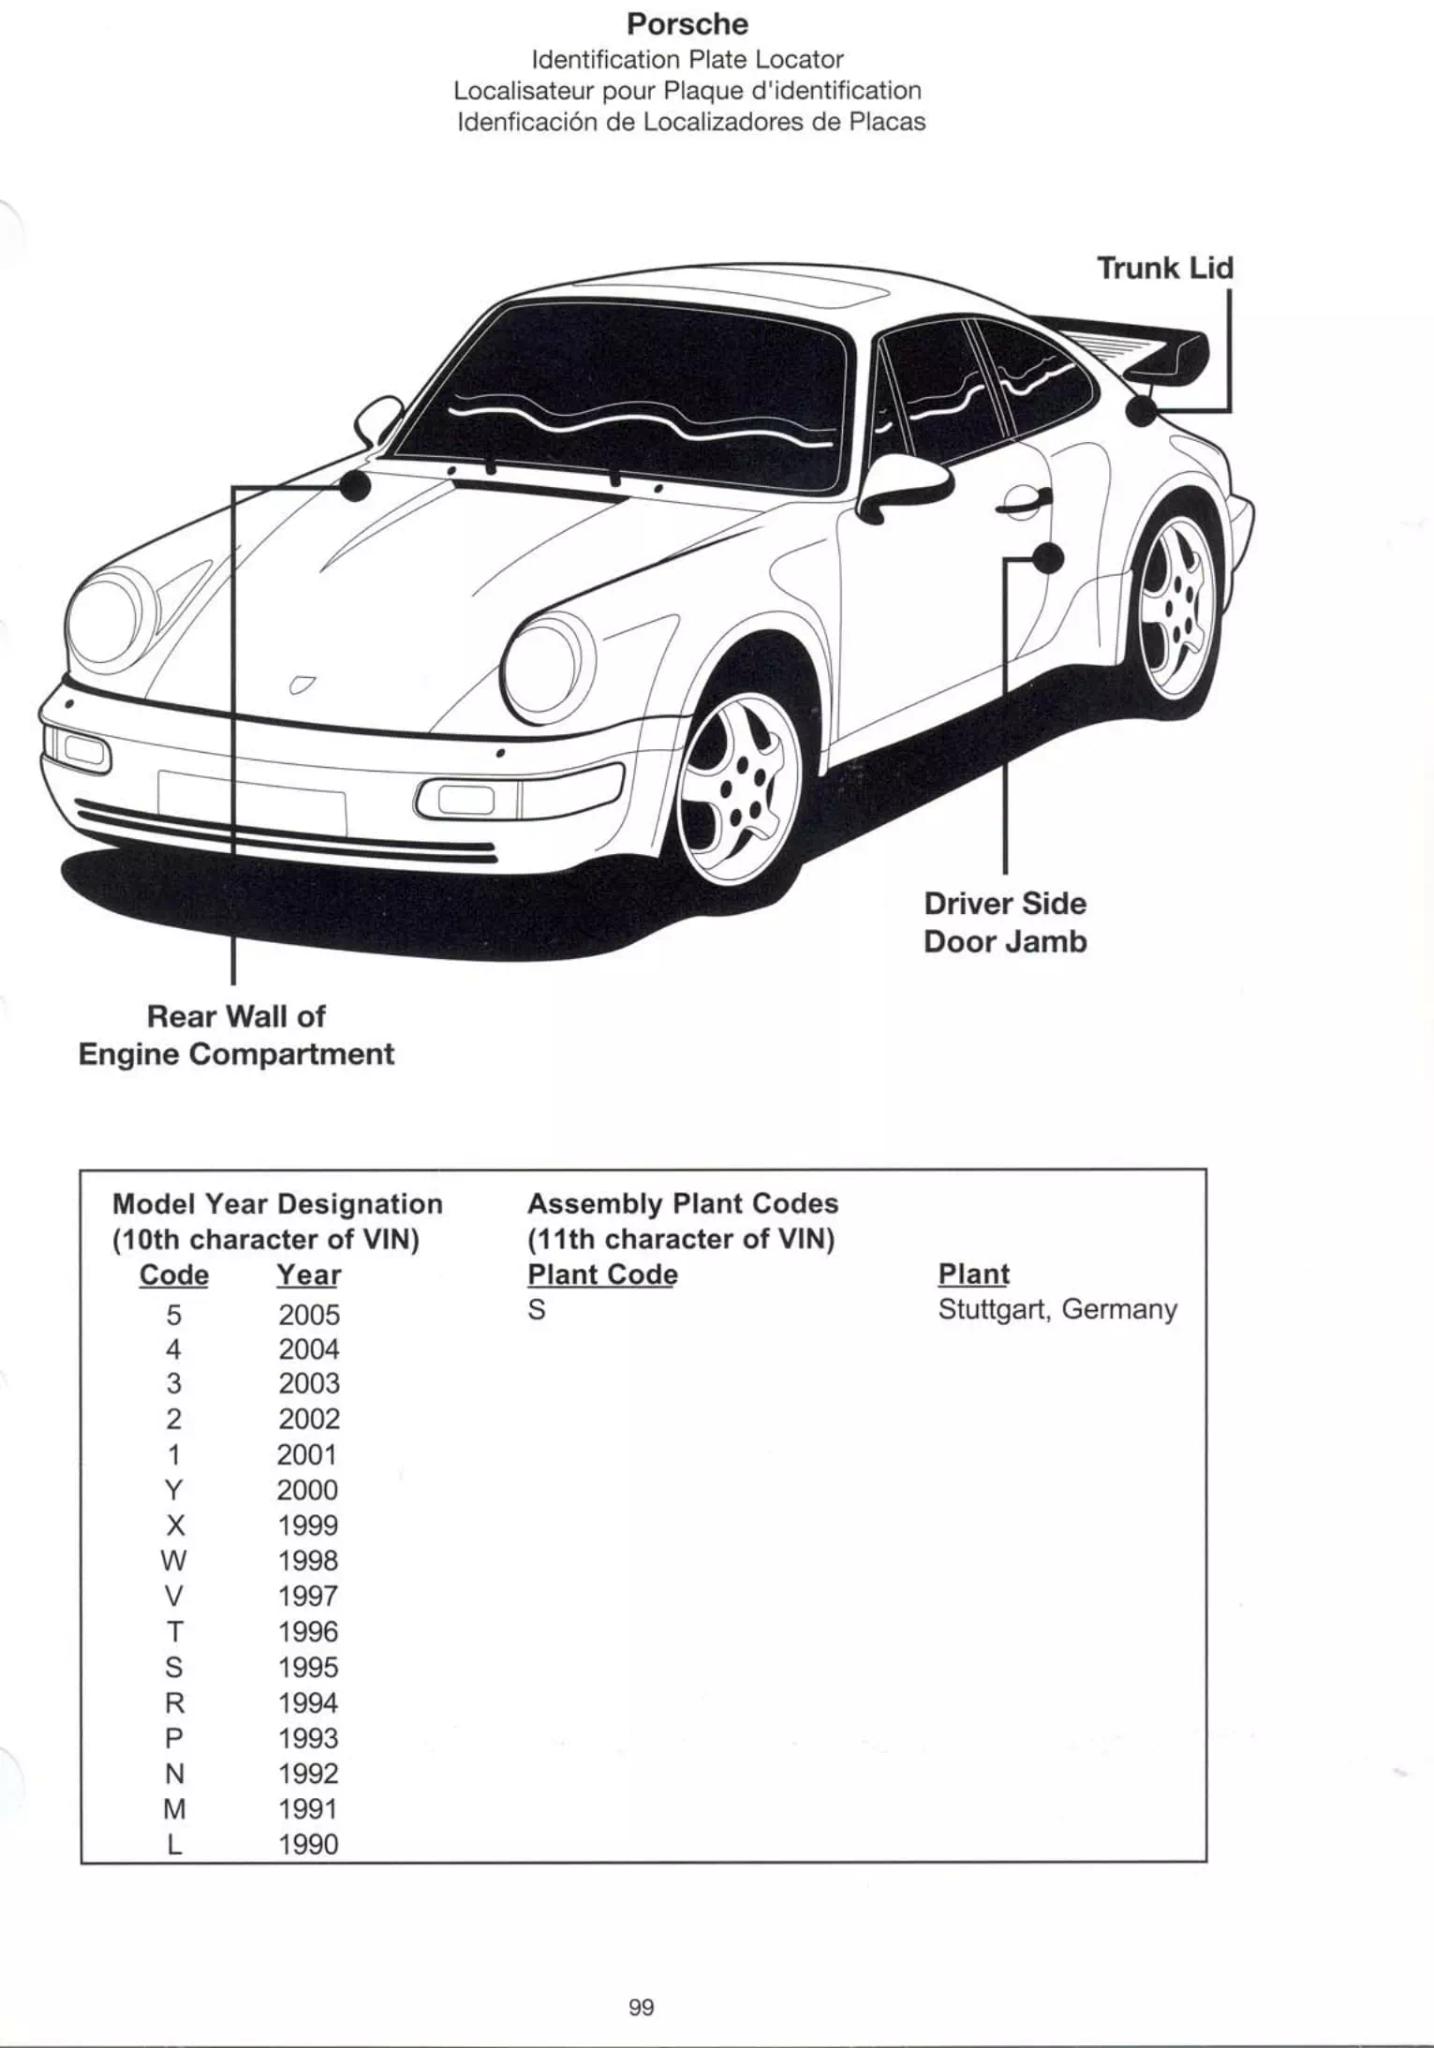 Exterior Paint Codes for Porsche and their color codes